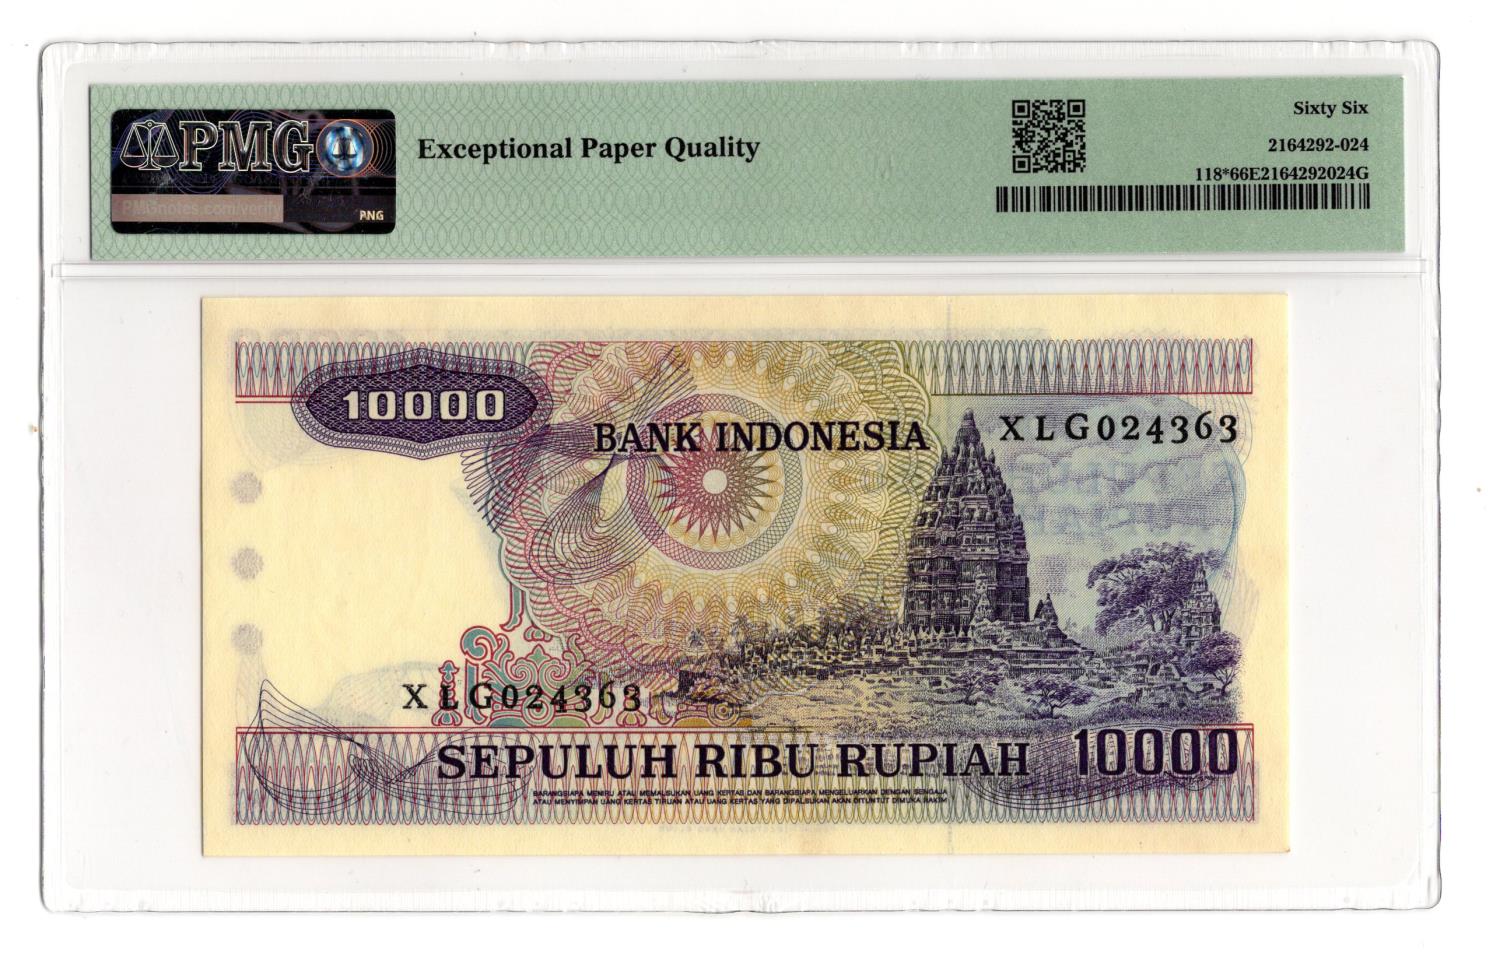 Indonesia 10000 Rupiah dated 1979, scarce REPLACEMENT note serial no. XLG 024363 (TBB B576r, - Image 2 of 2